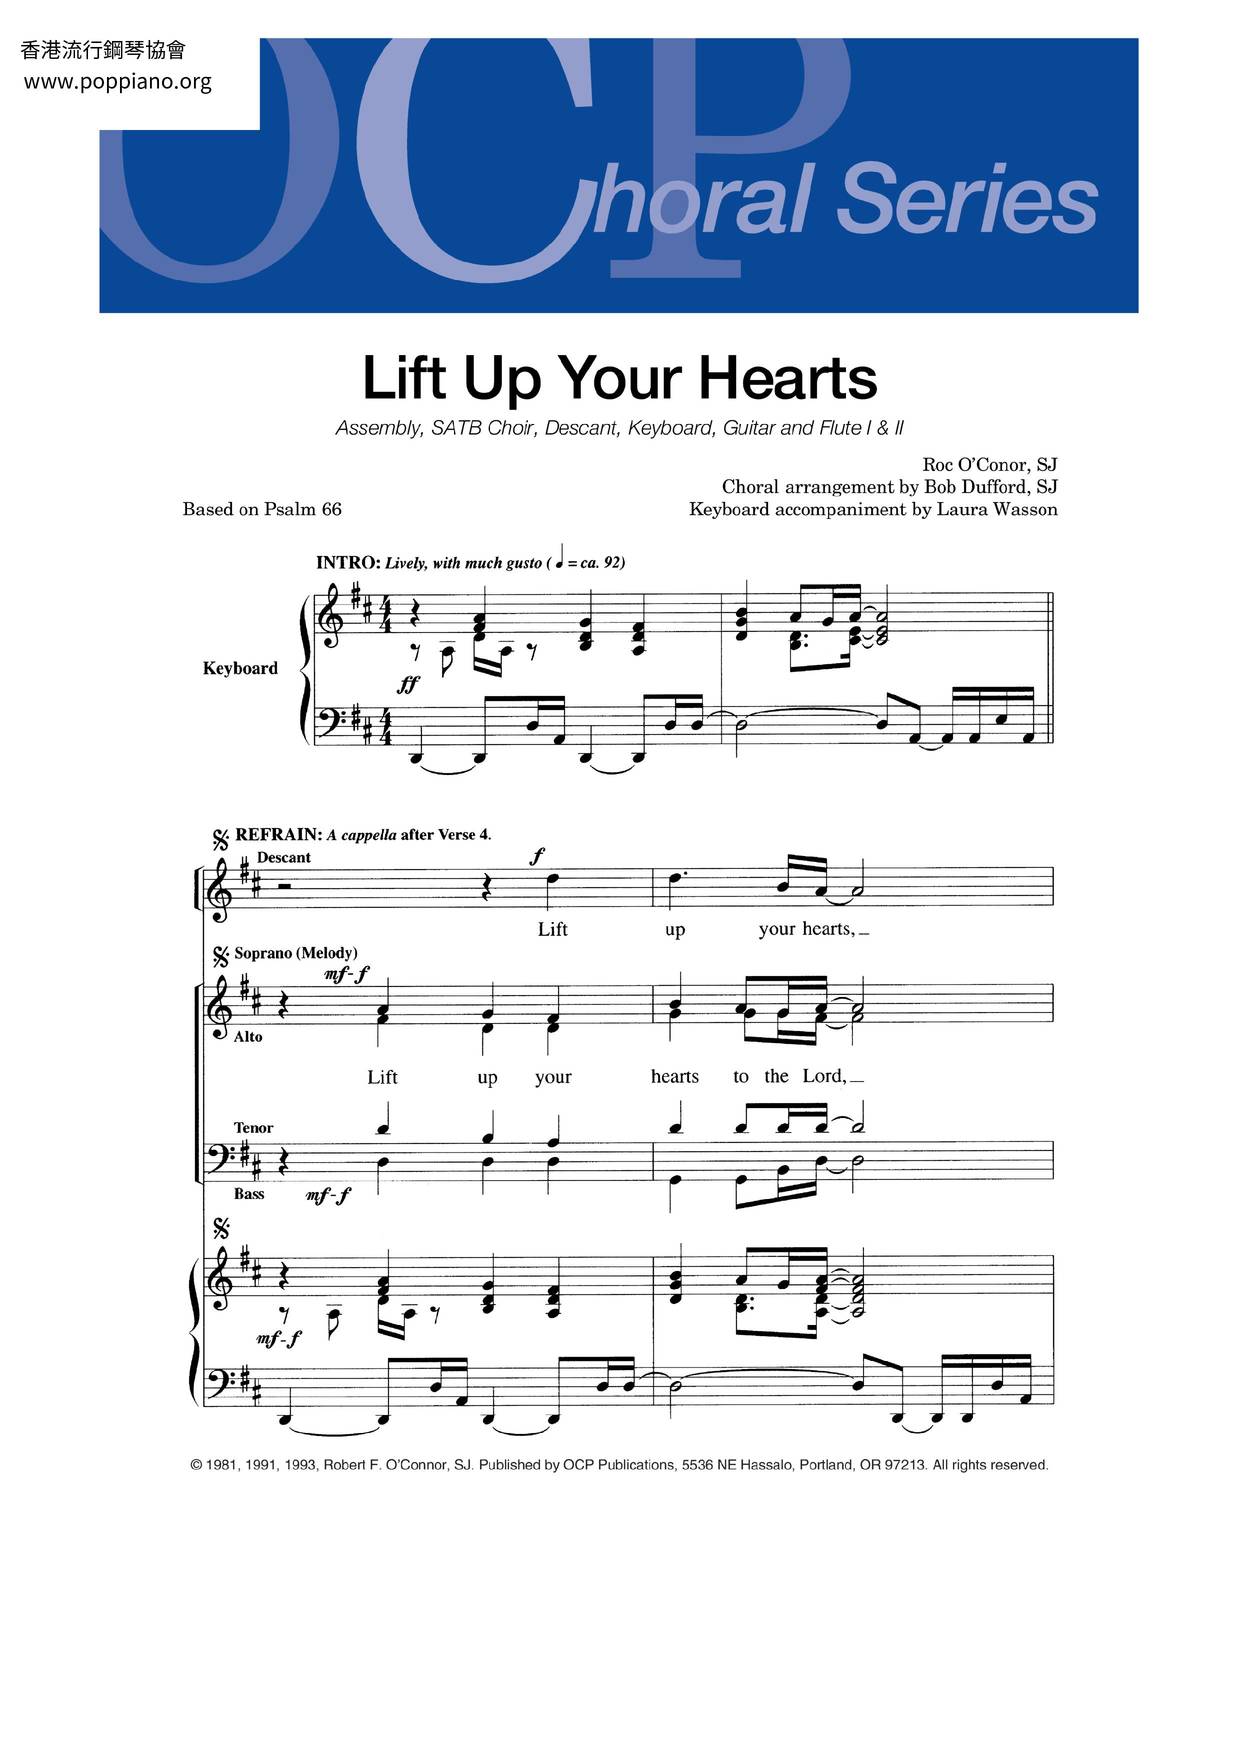 Lift Up Your Hearts Score